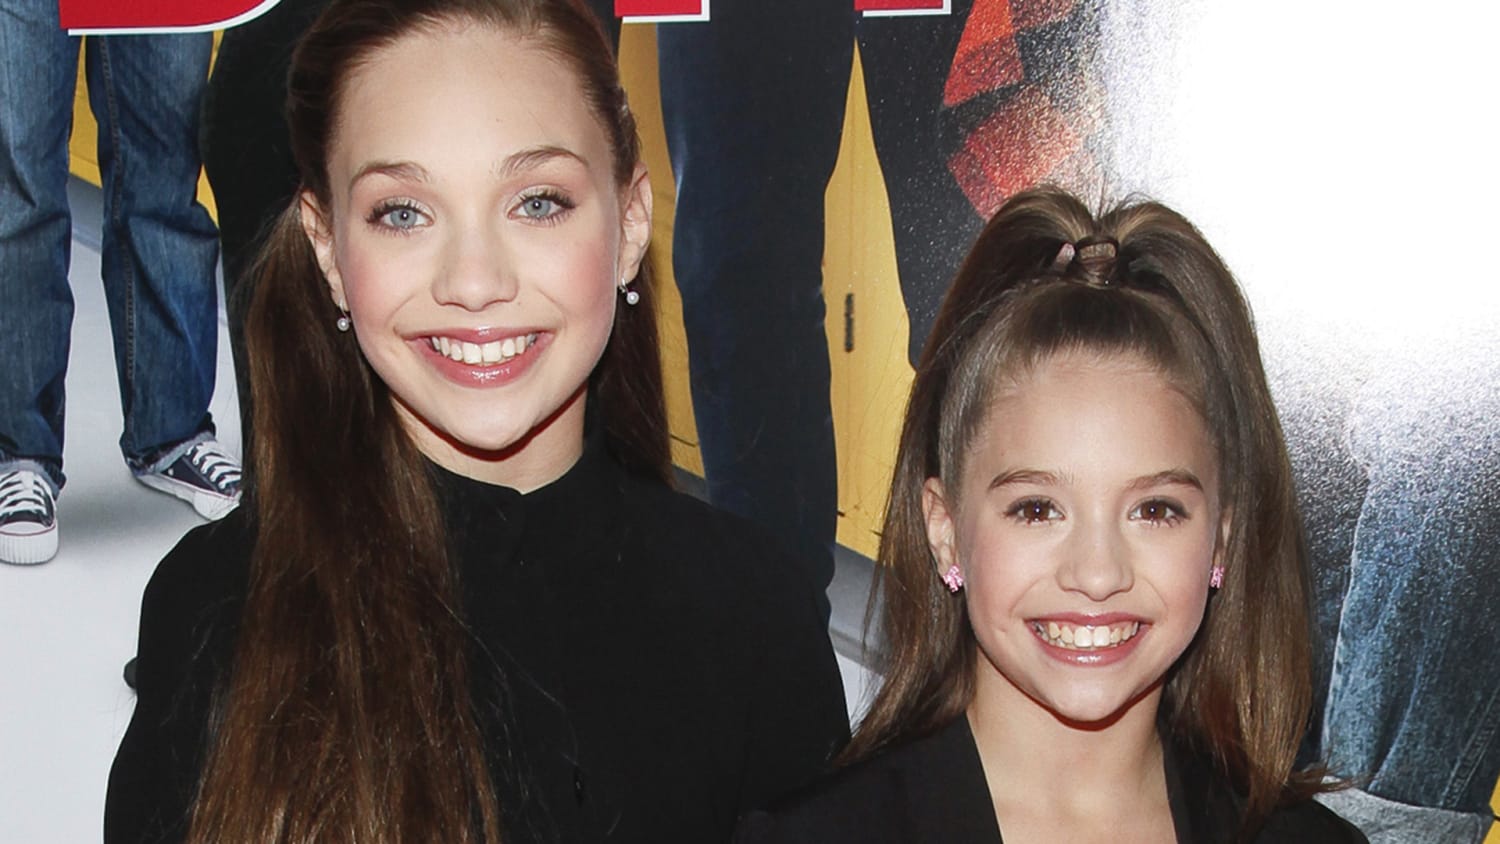 Maddie and Mackenzie Ziegler on life after 'Dance Moms 